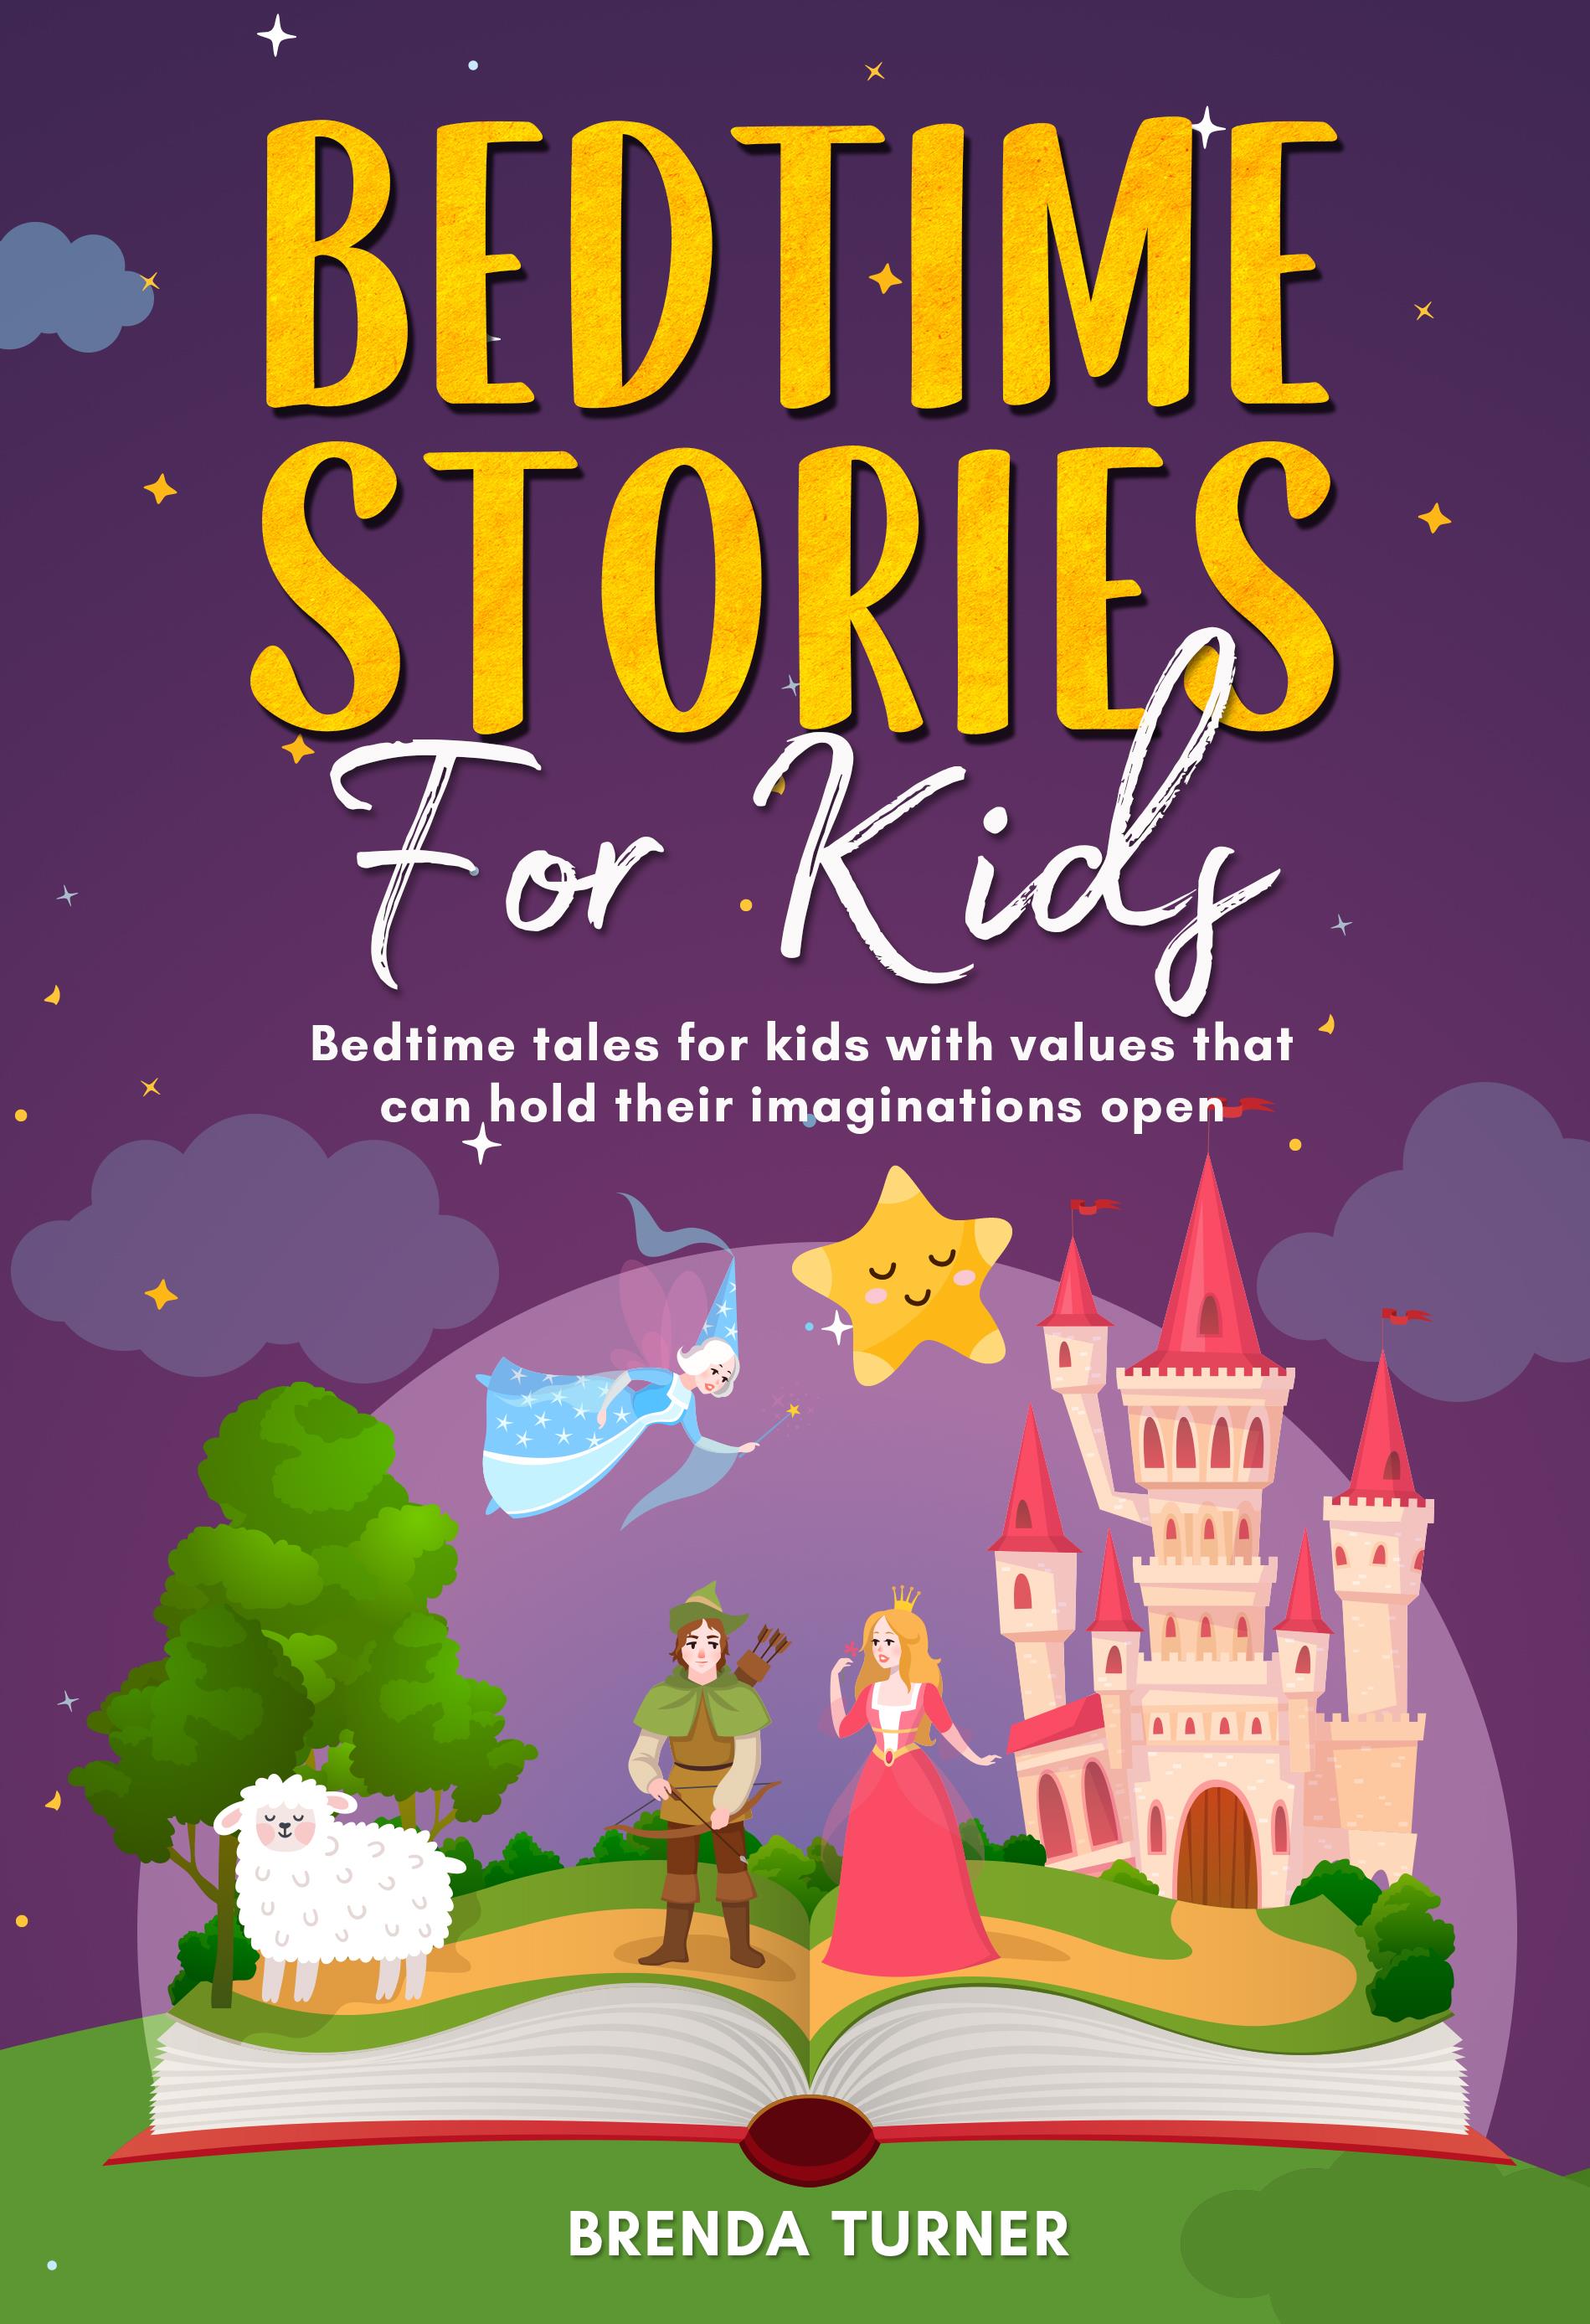 Bedtime stories for kids. Bedtime tales for kids with values that can hold their imaginations open.